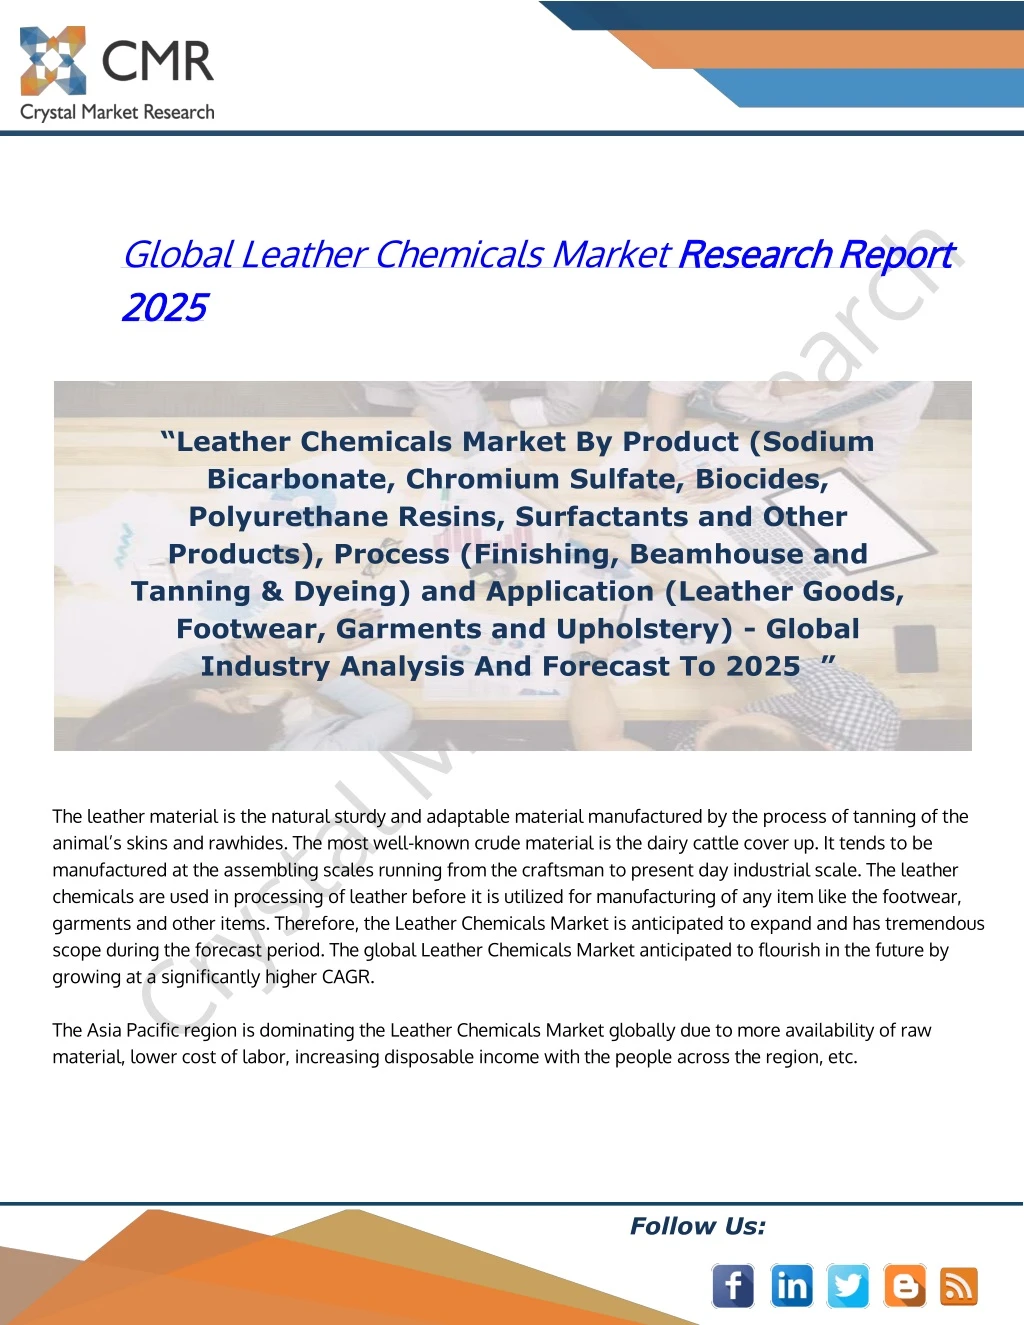 global leather chemicals market research 2025 2025